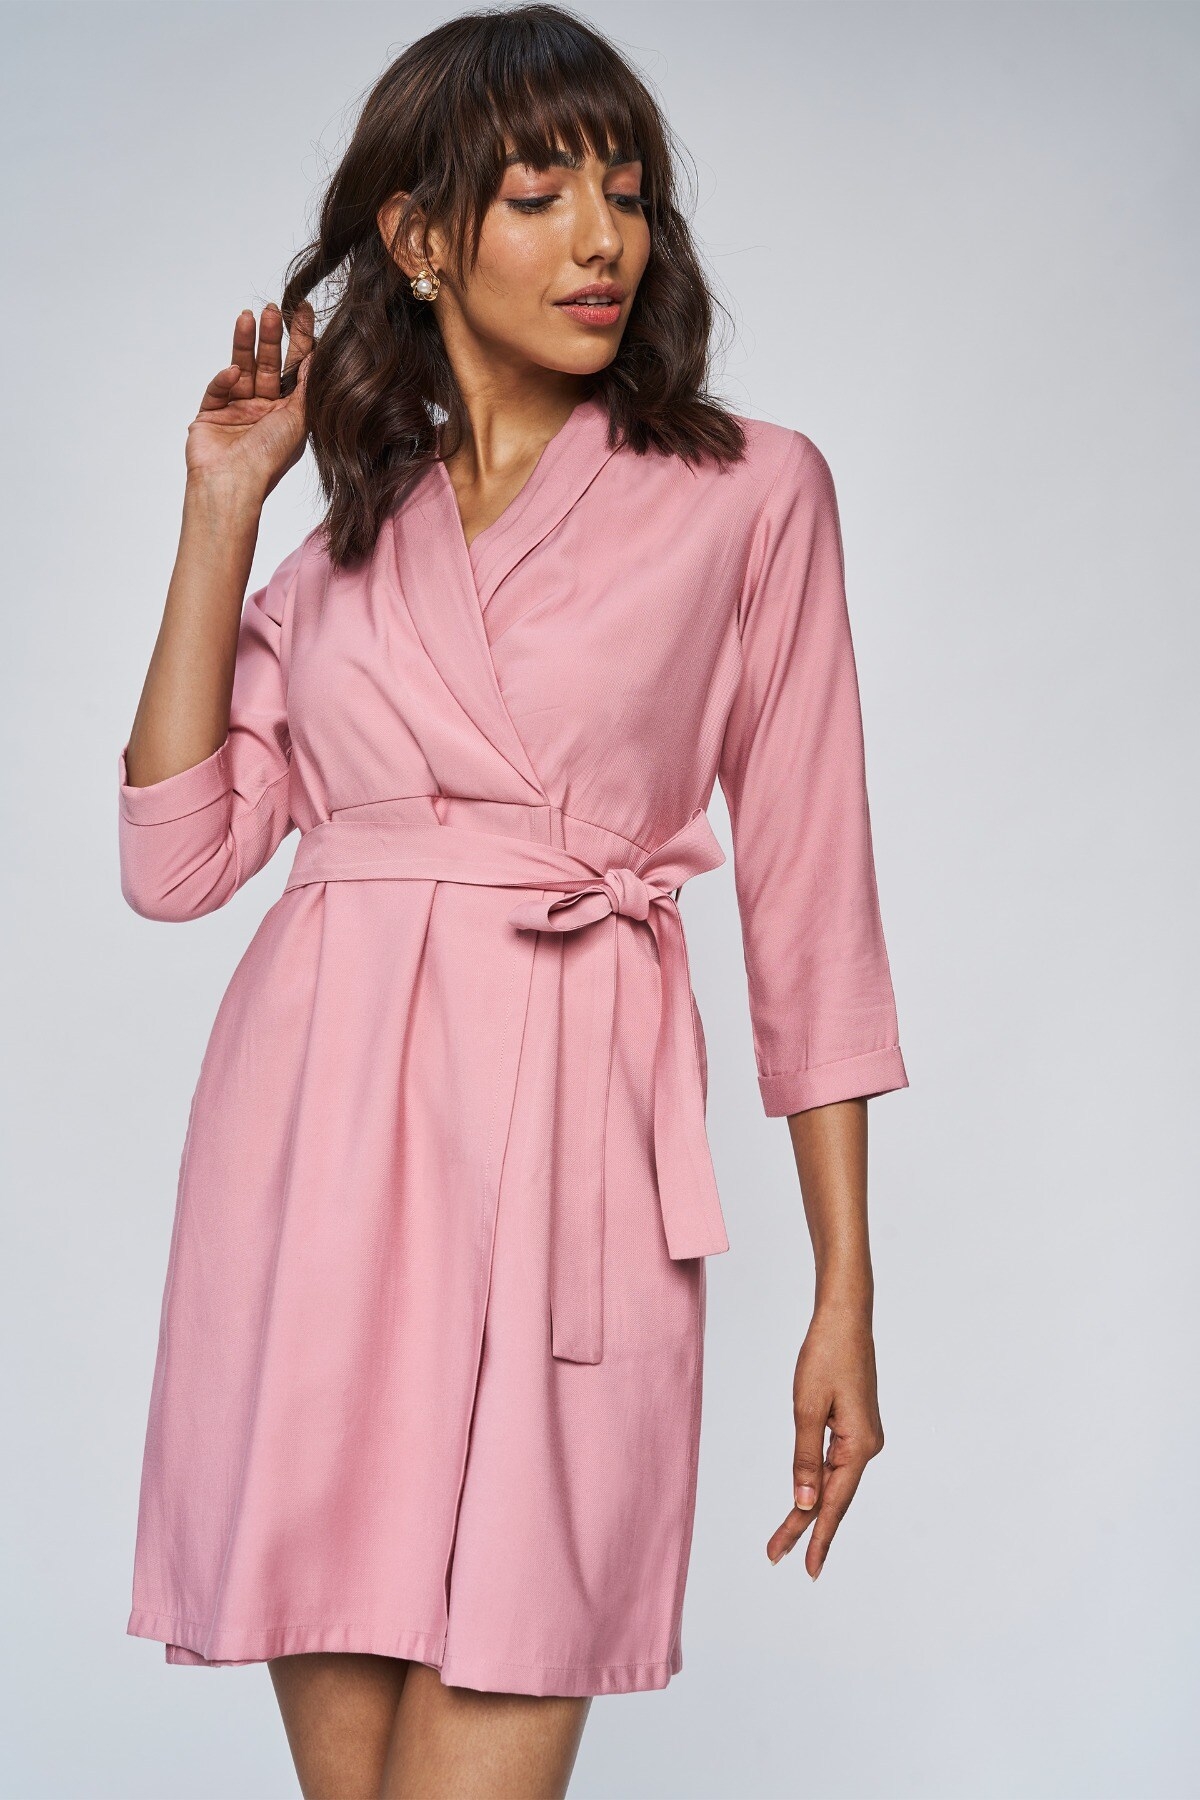 AND | Blush Solid Straight Knee Length Dress